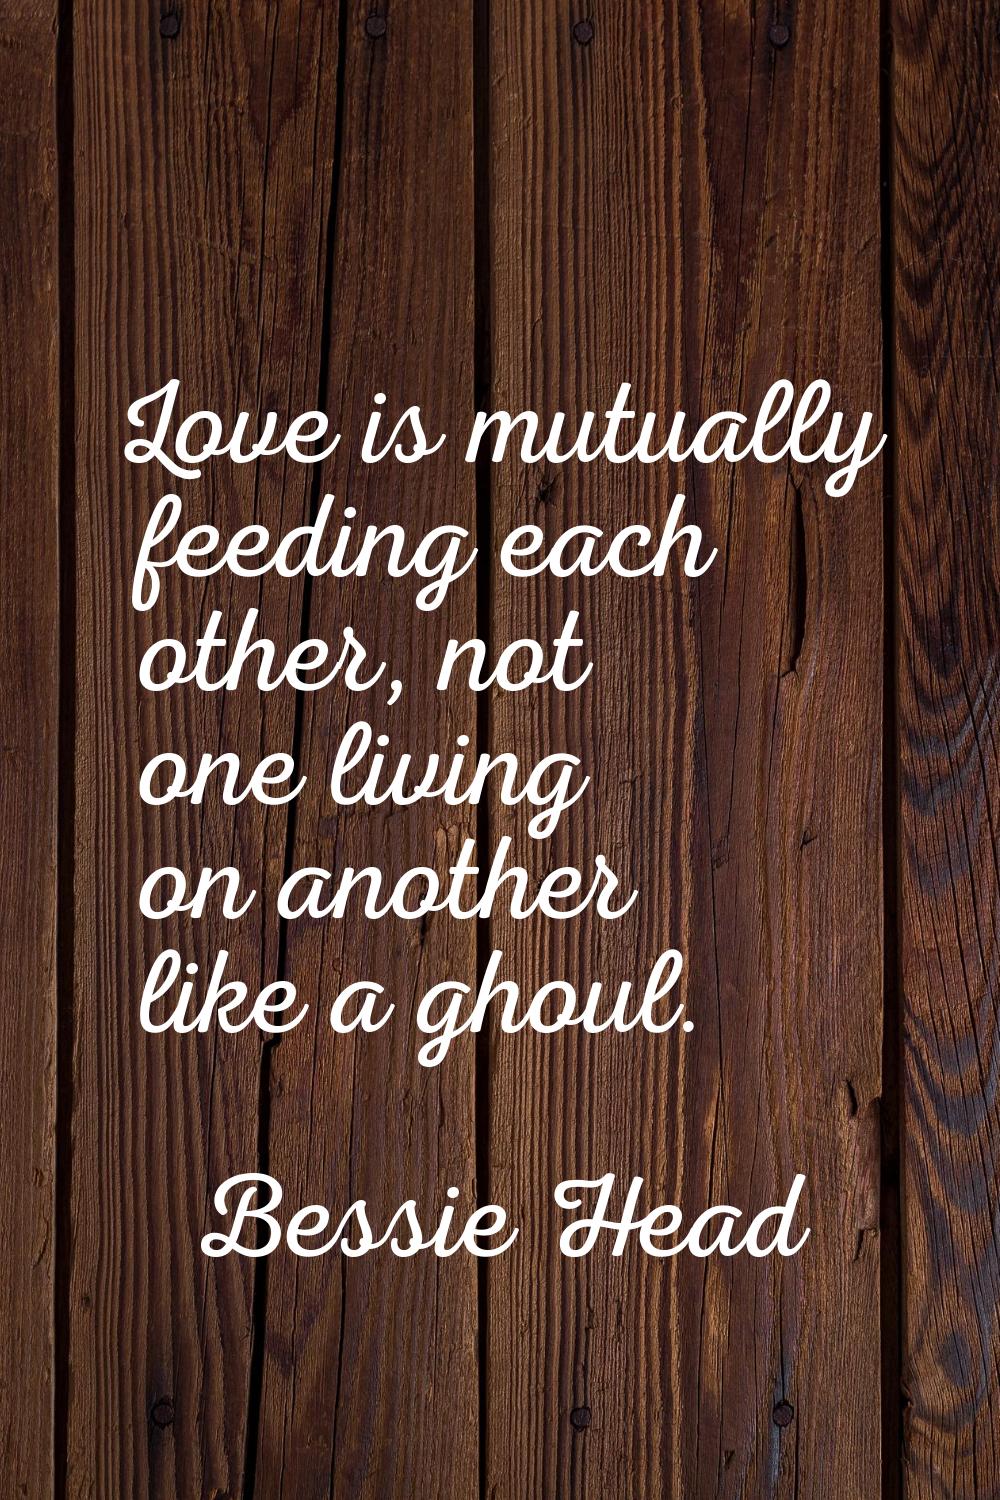 Love is mutually feeding each other, not one living on another like a ghoul.